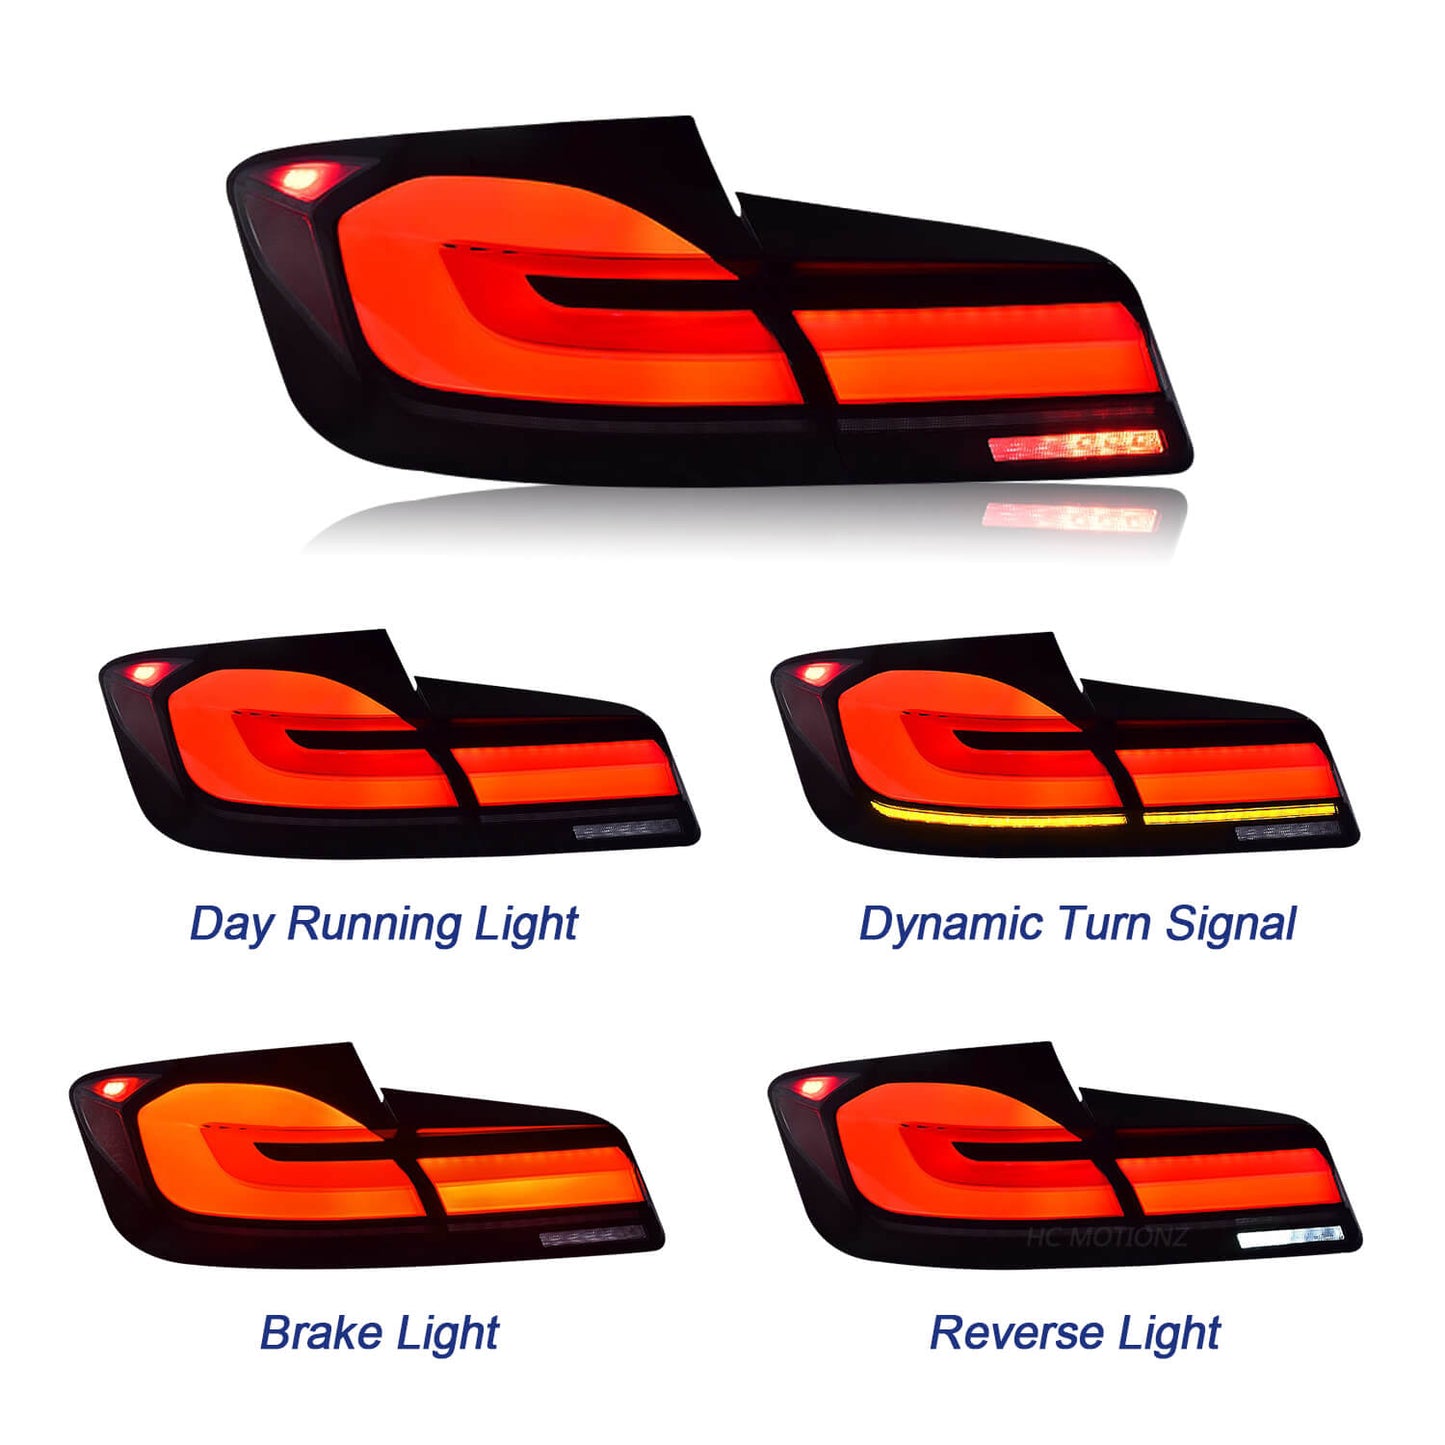 HCMOTION LED Tail Lights for BMW Series 5 F10 2010-2017